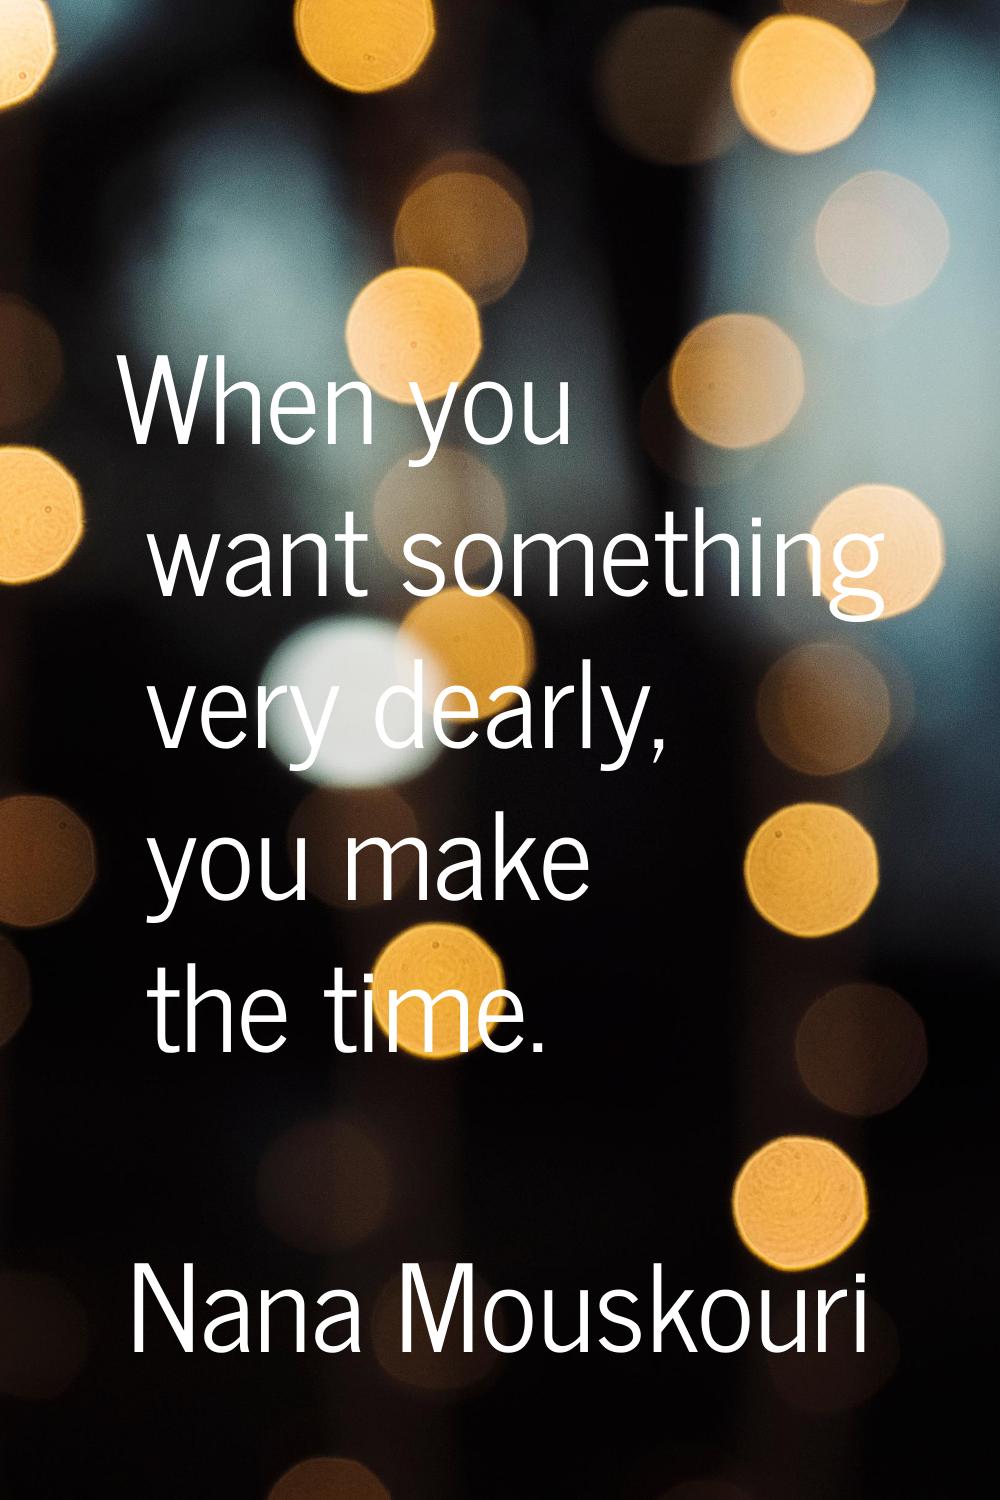 When you want something very dearly, you make the time.